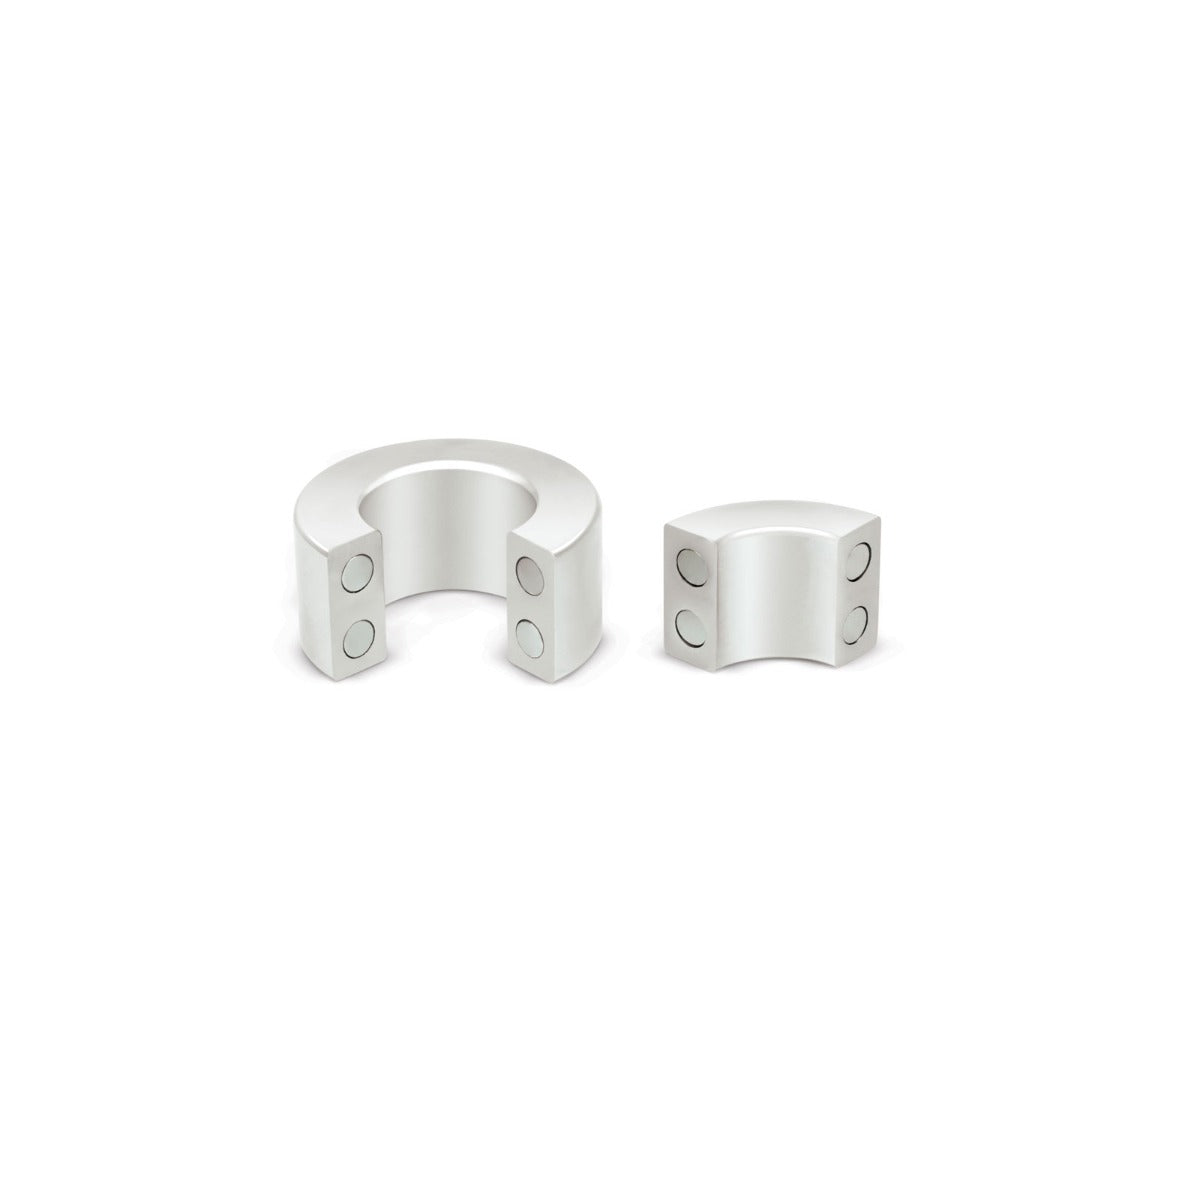 Stainless Steel Magnetic Ring 30mm (8067619422447)